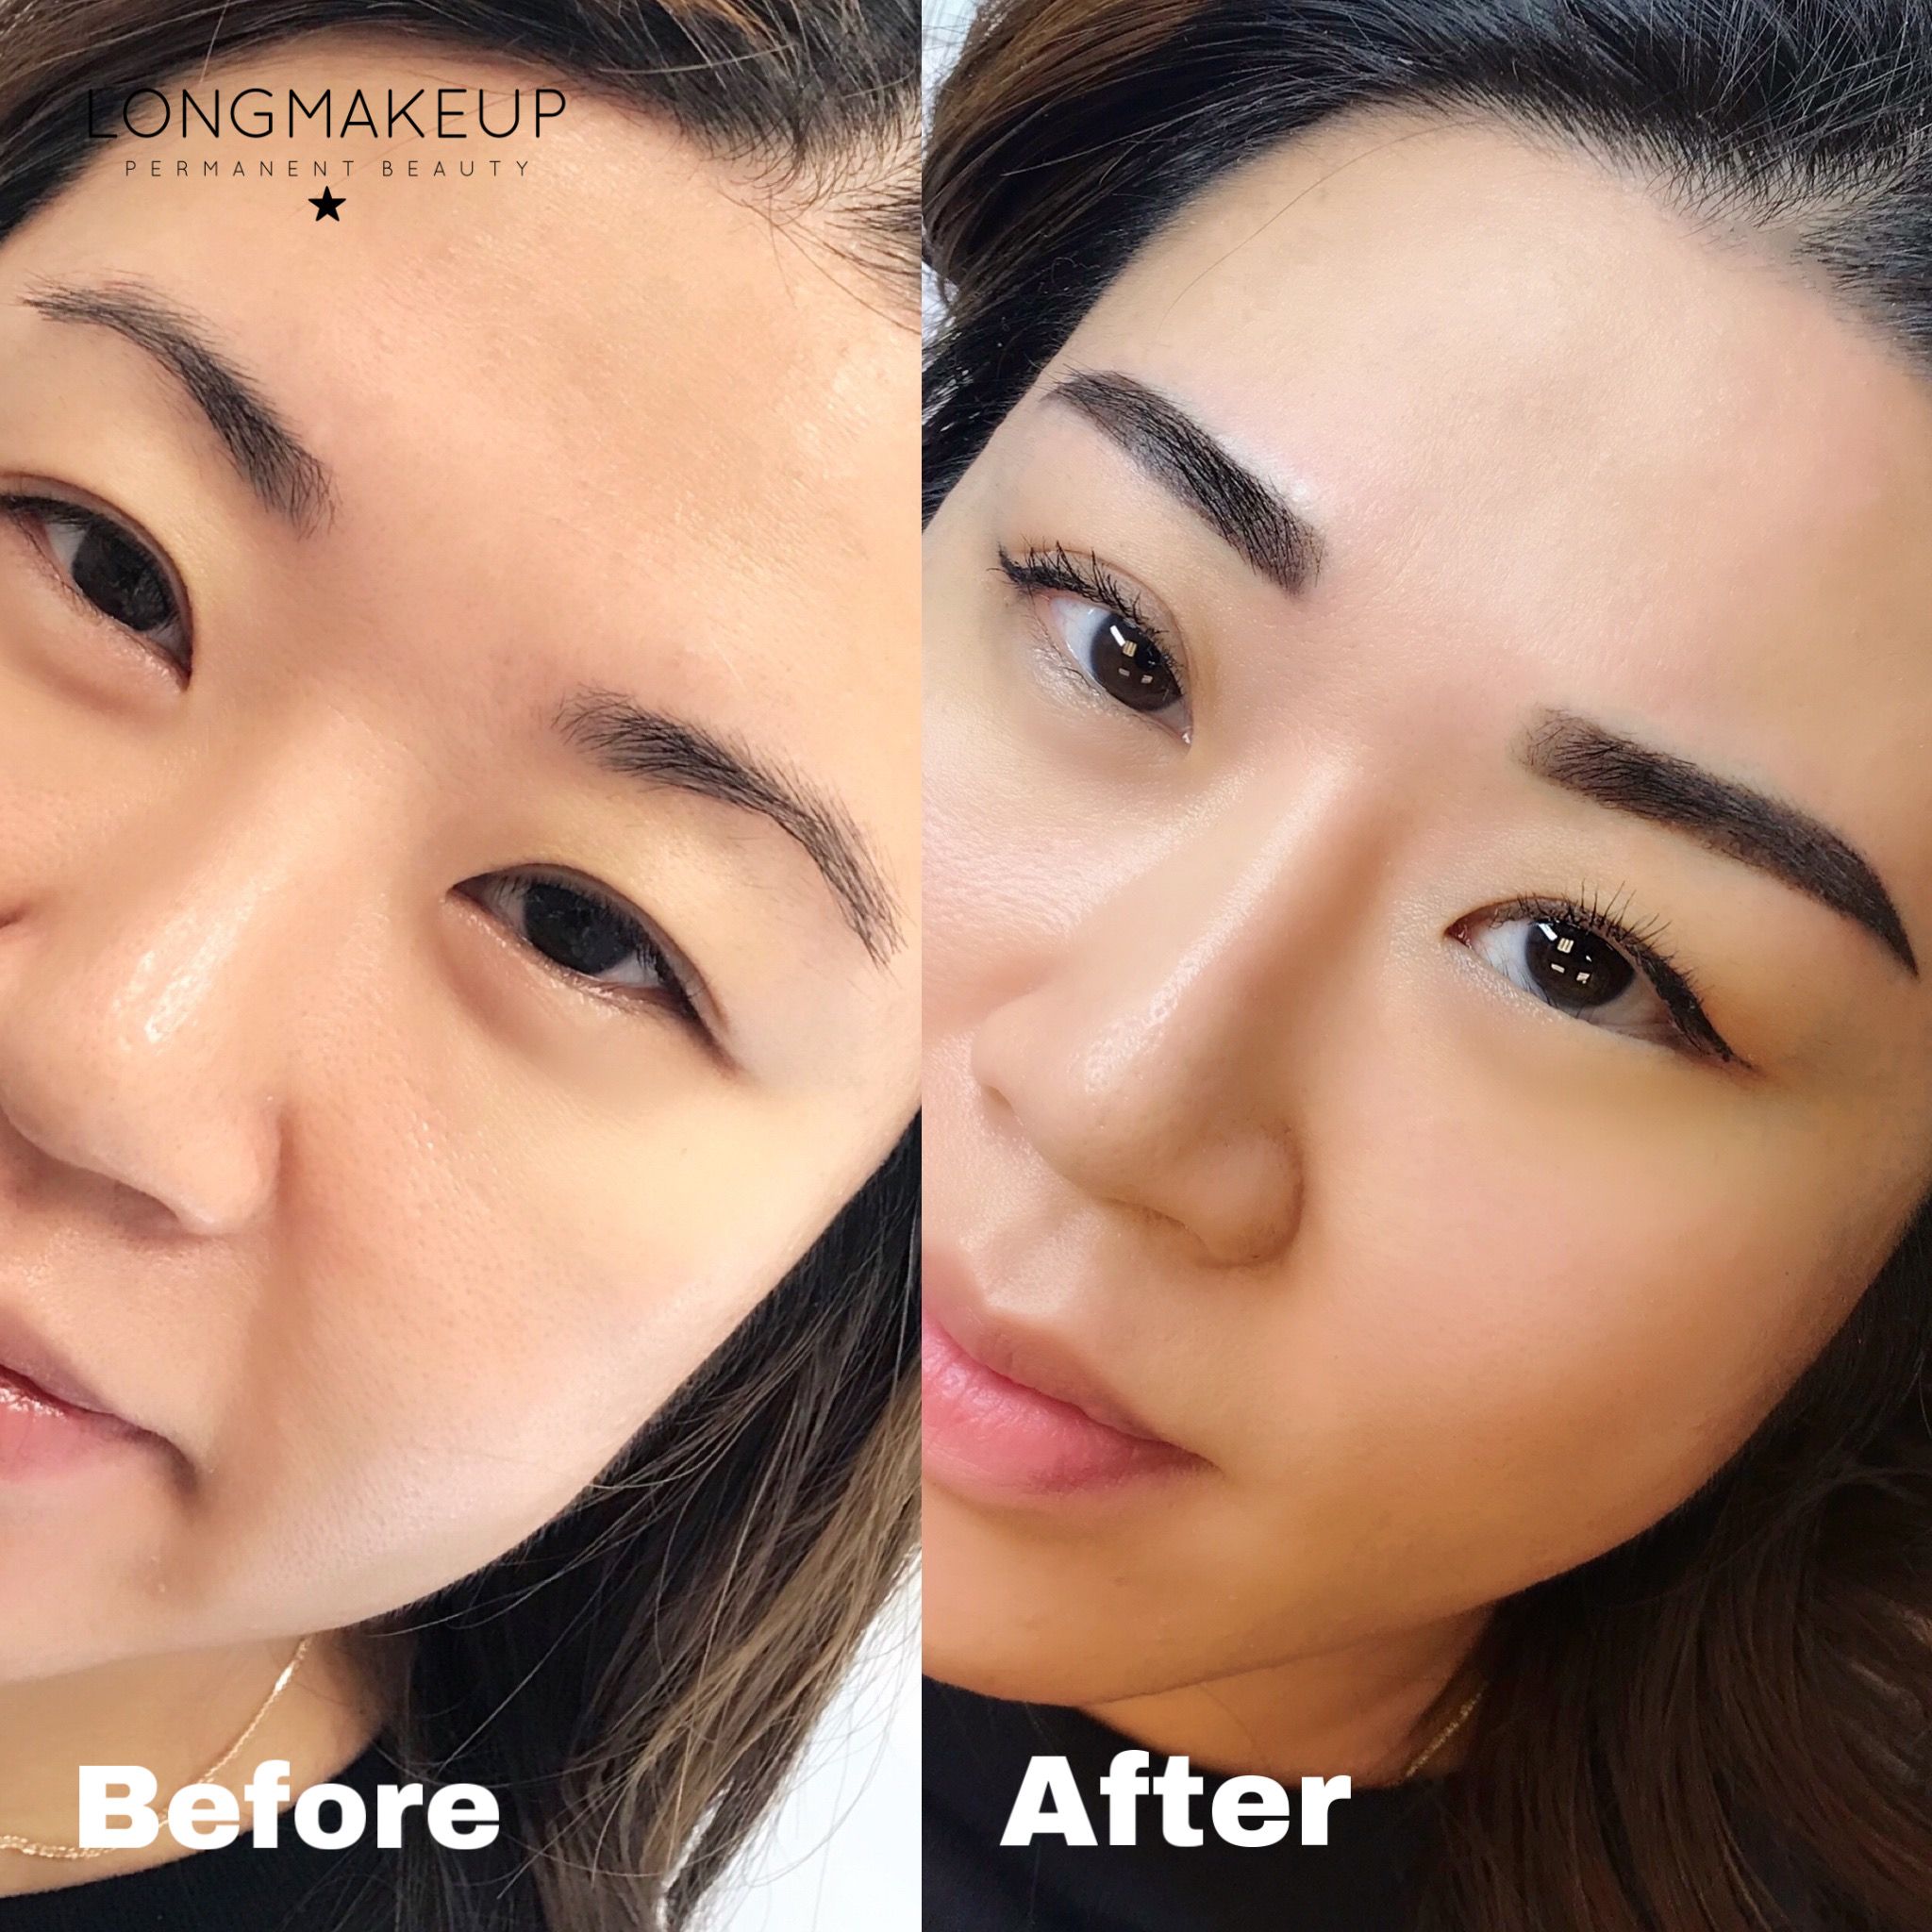 Powder brows before and after